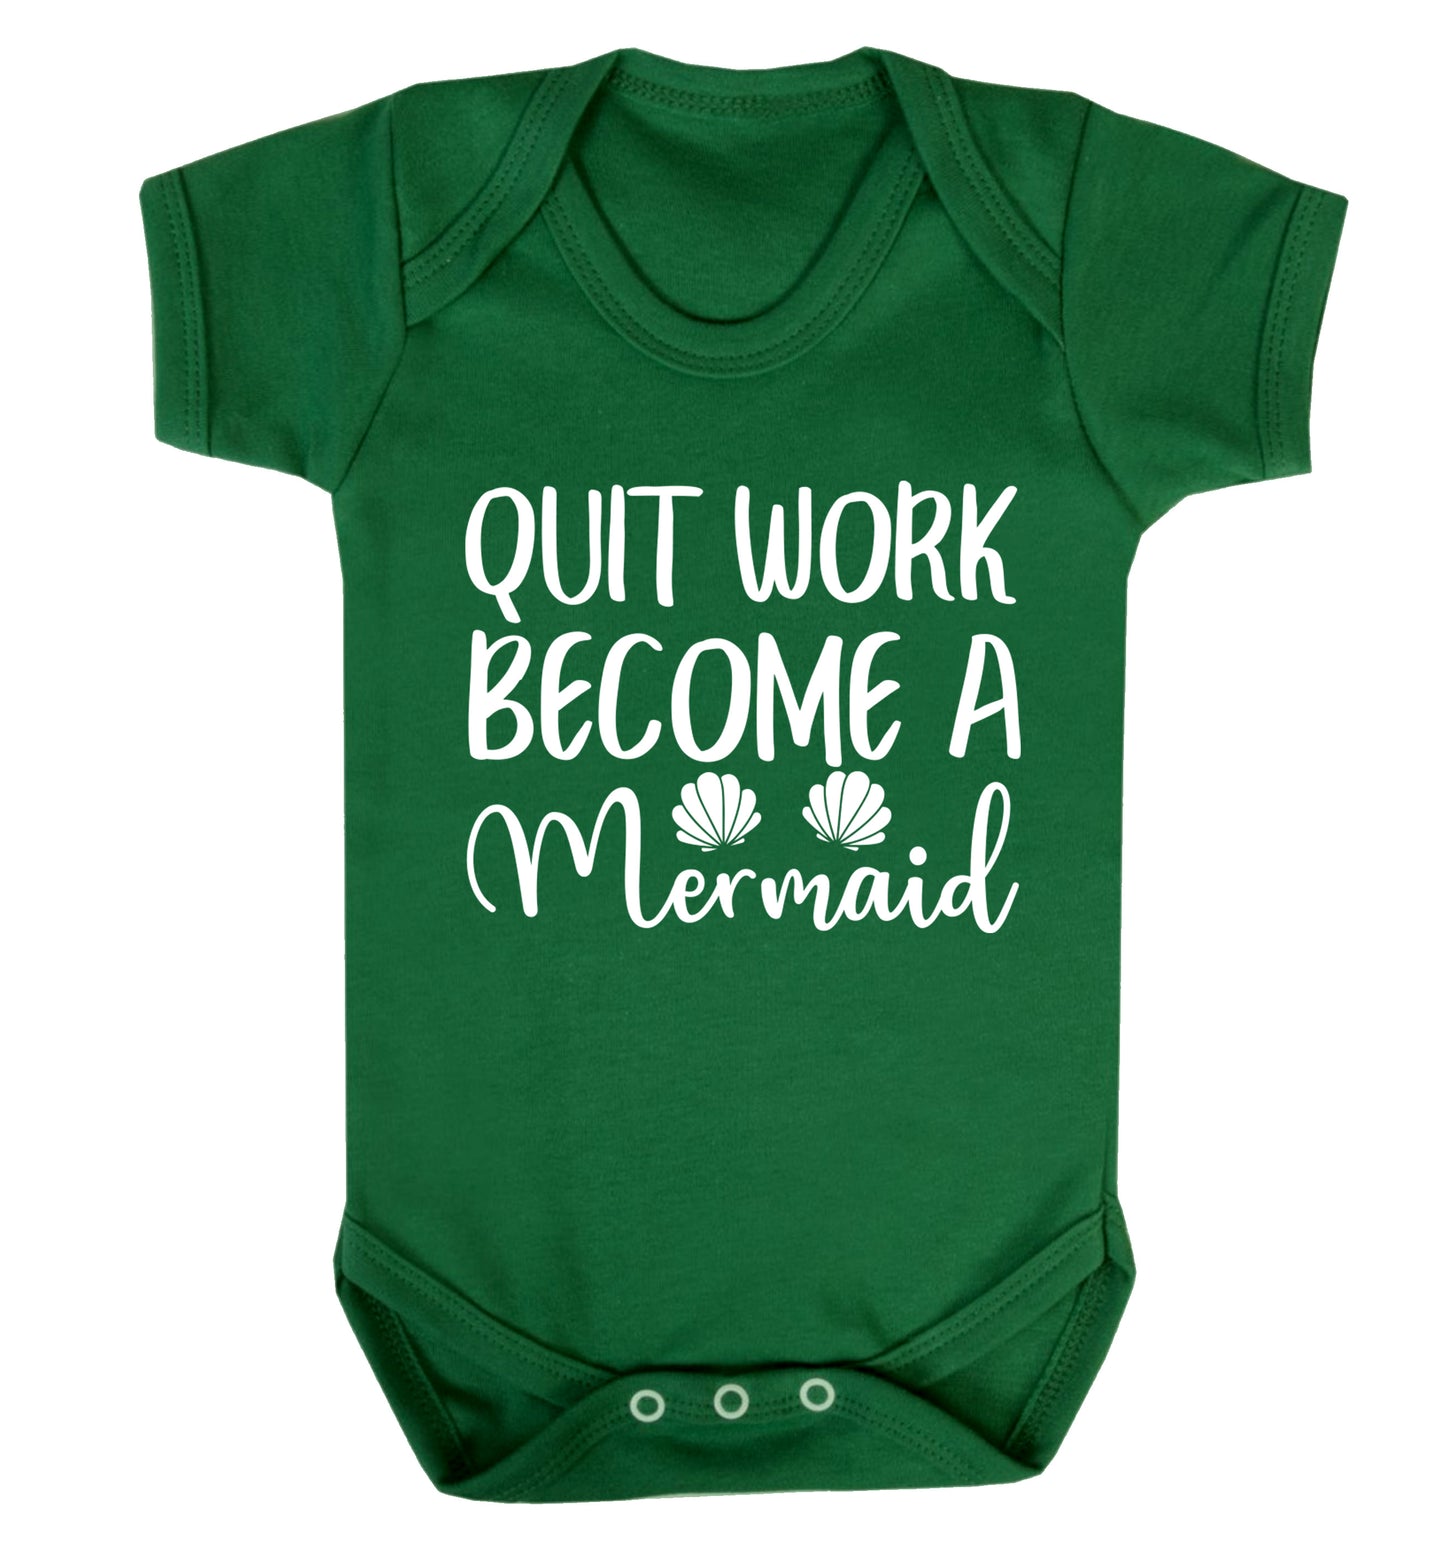 Quit work become a mermaid Baby Vest green 18-24 months